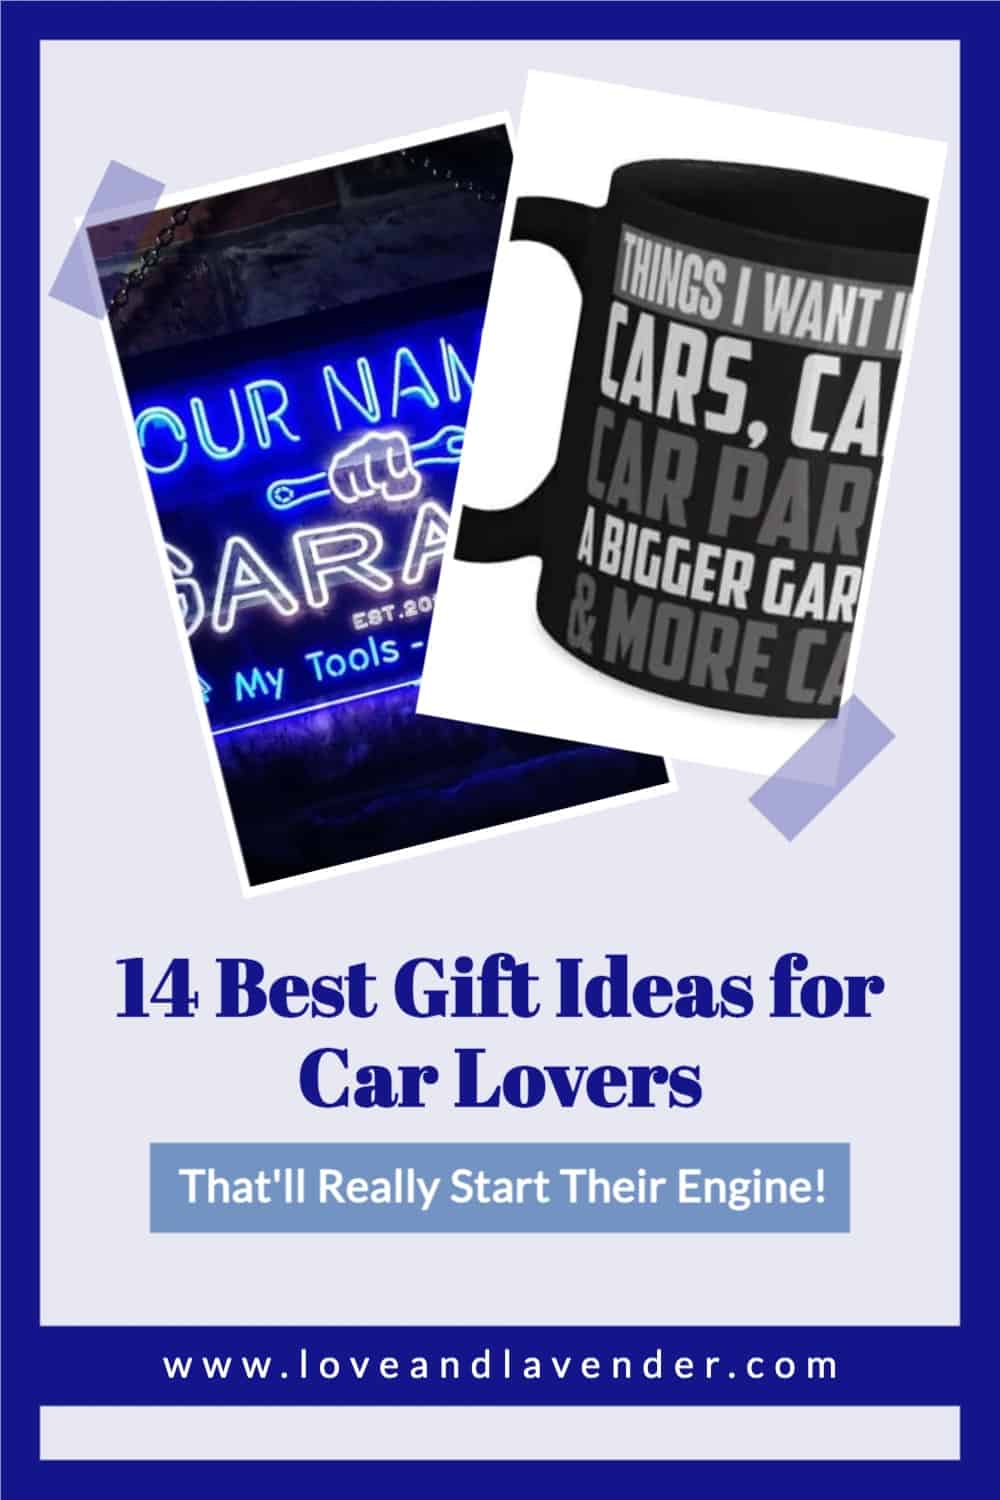 14 Best Gift Ideas for Car Lovers that'll Really Start Their Engine!